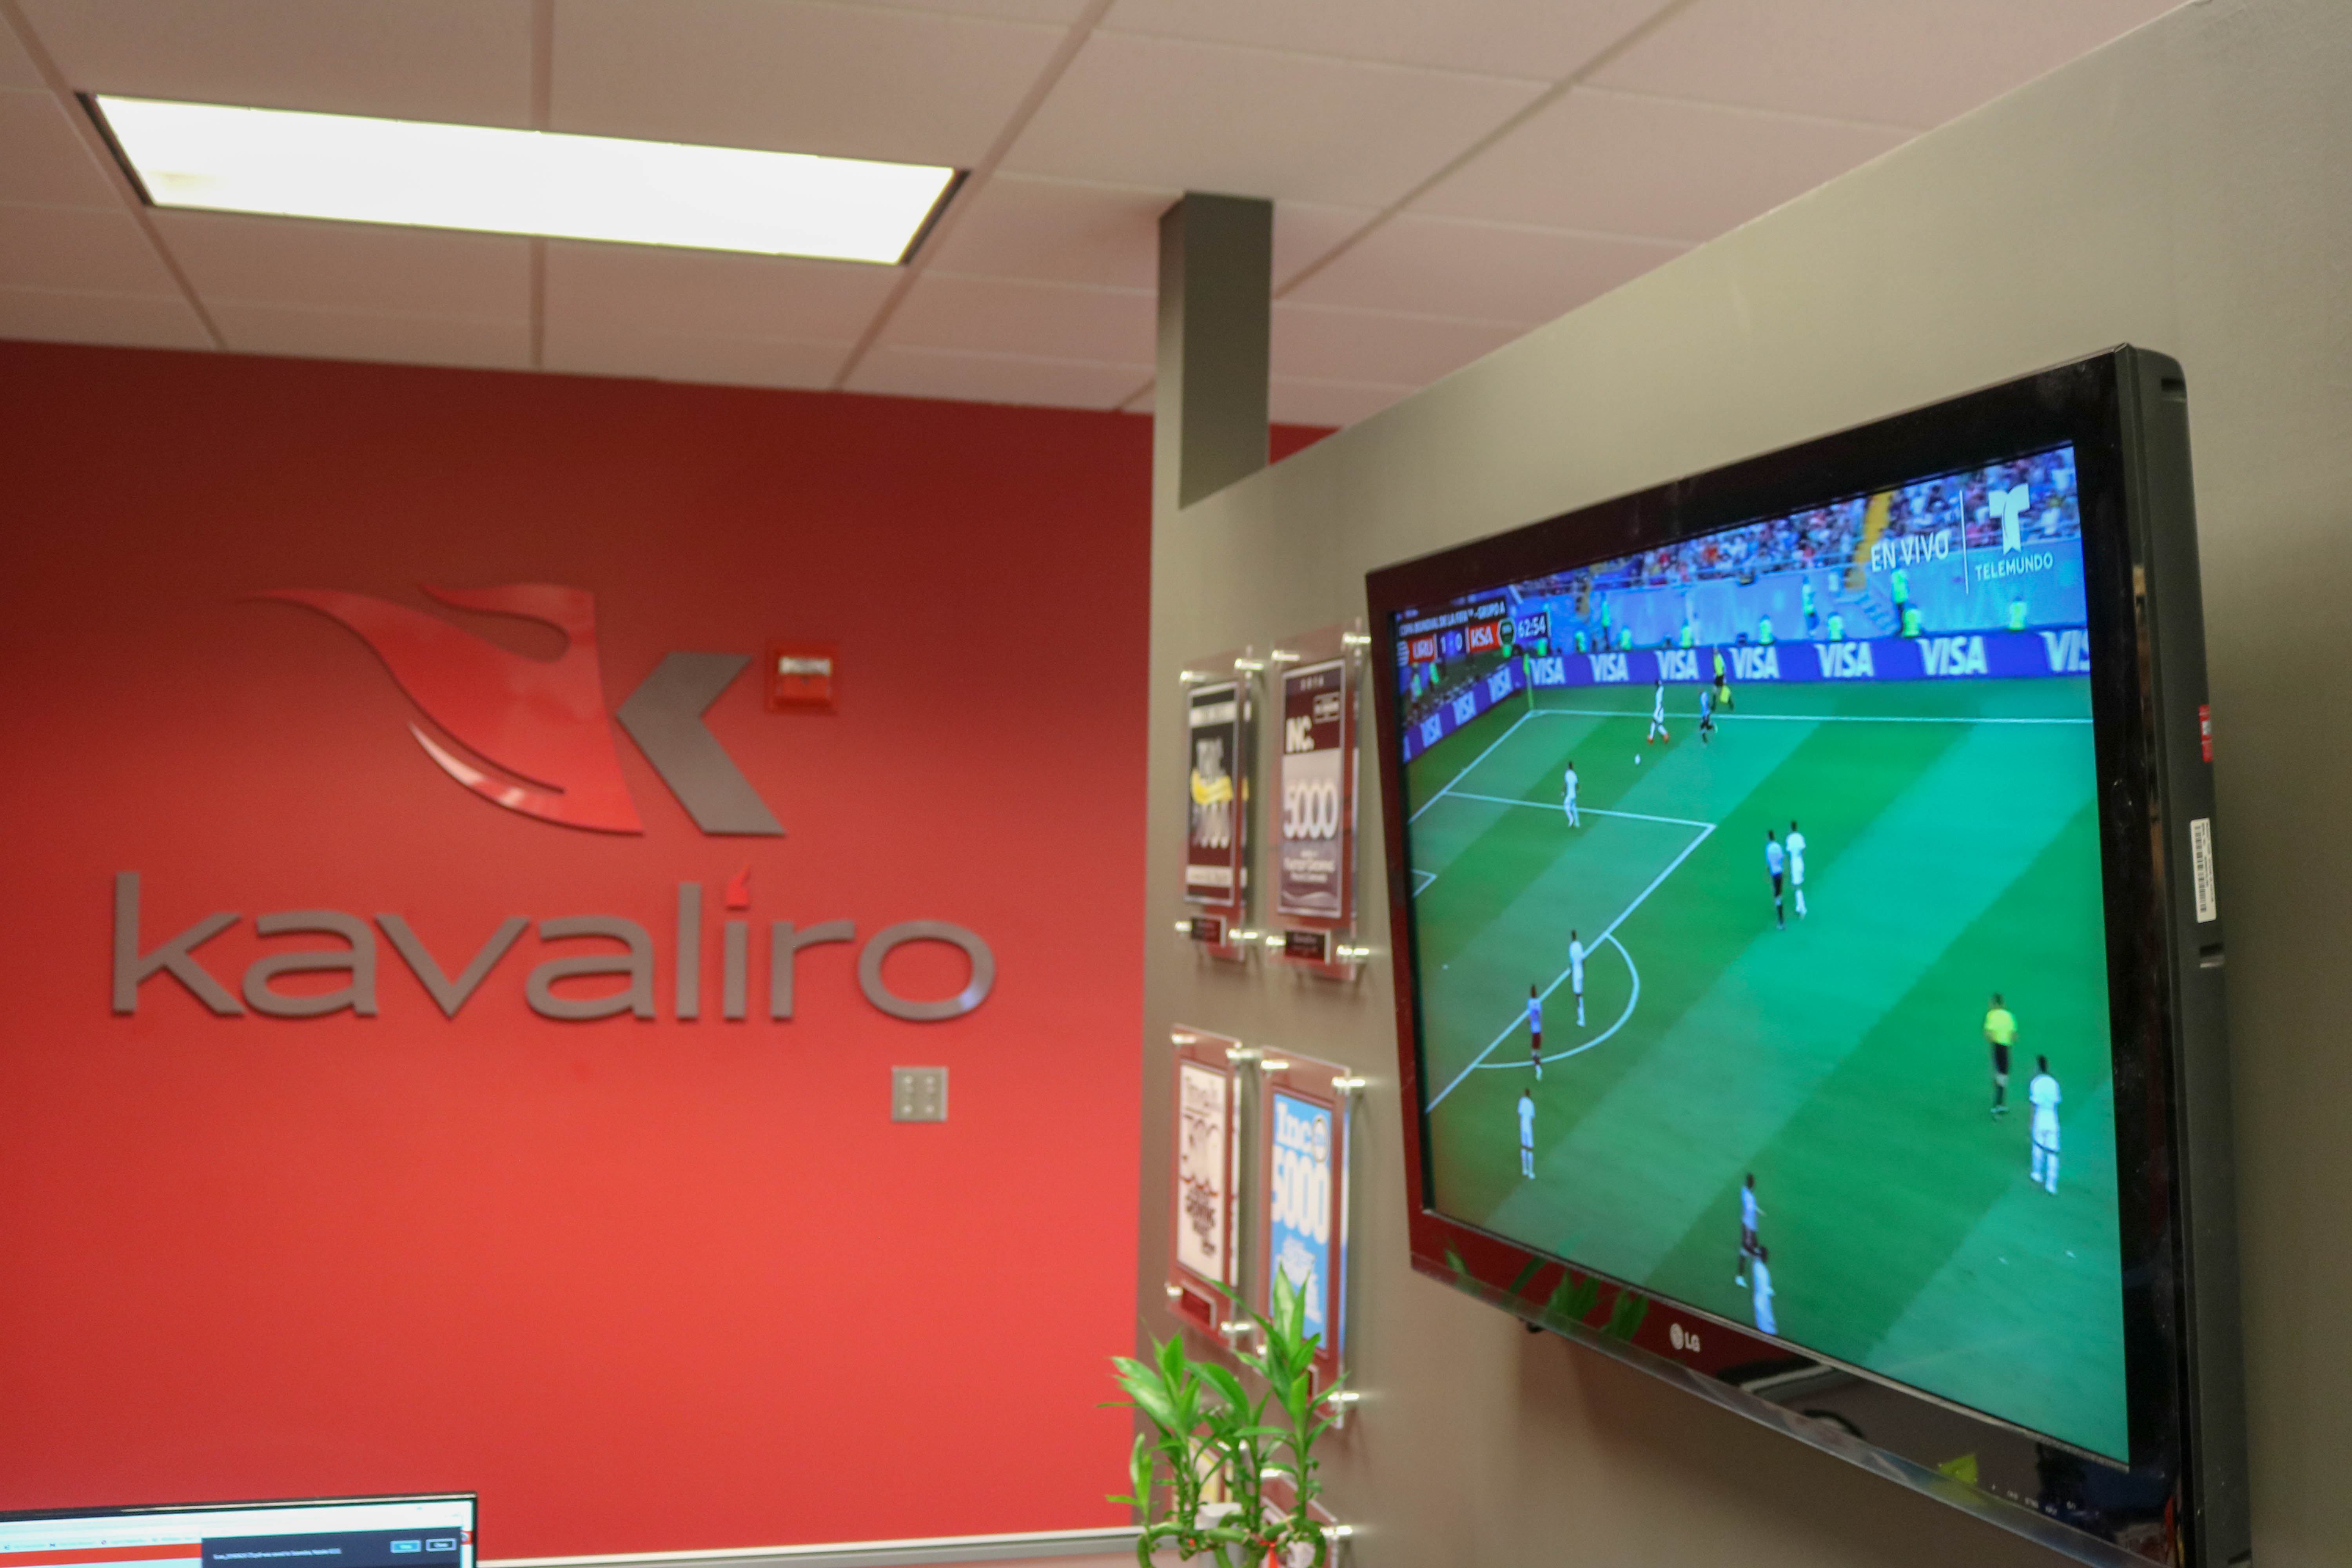 Why We're Watching the World Cup at Work